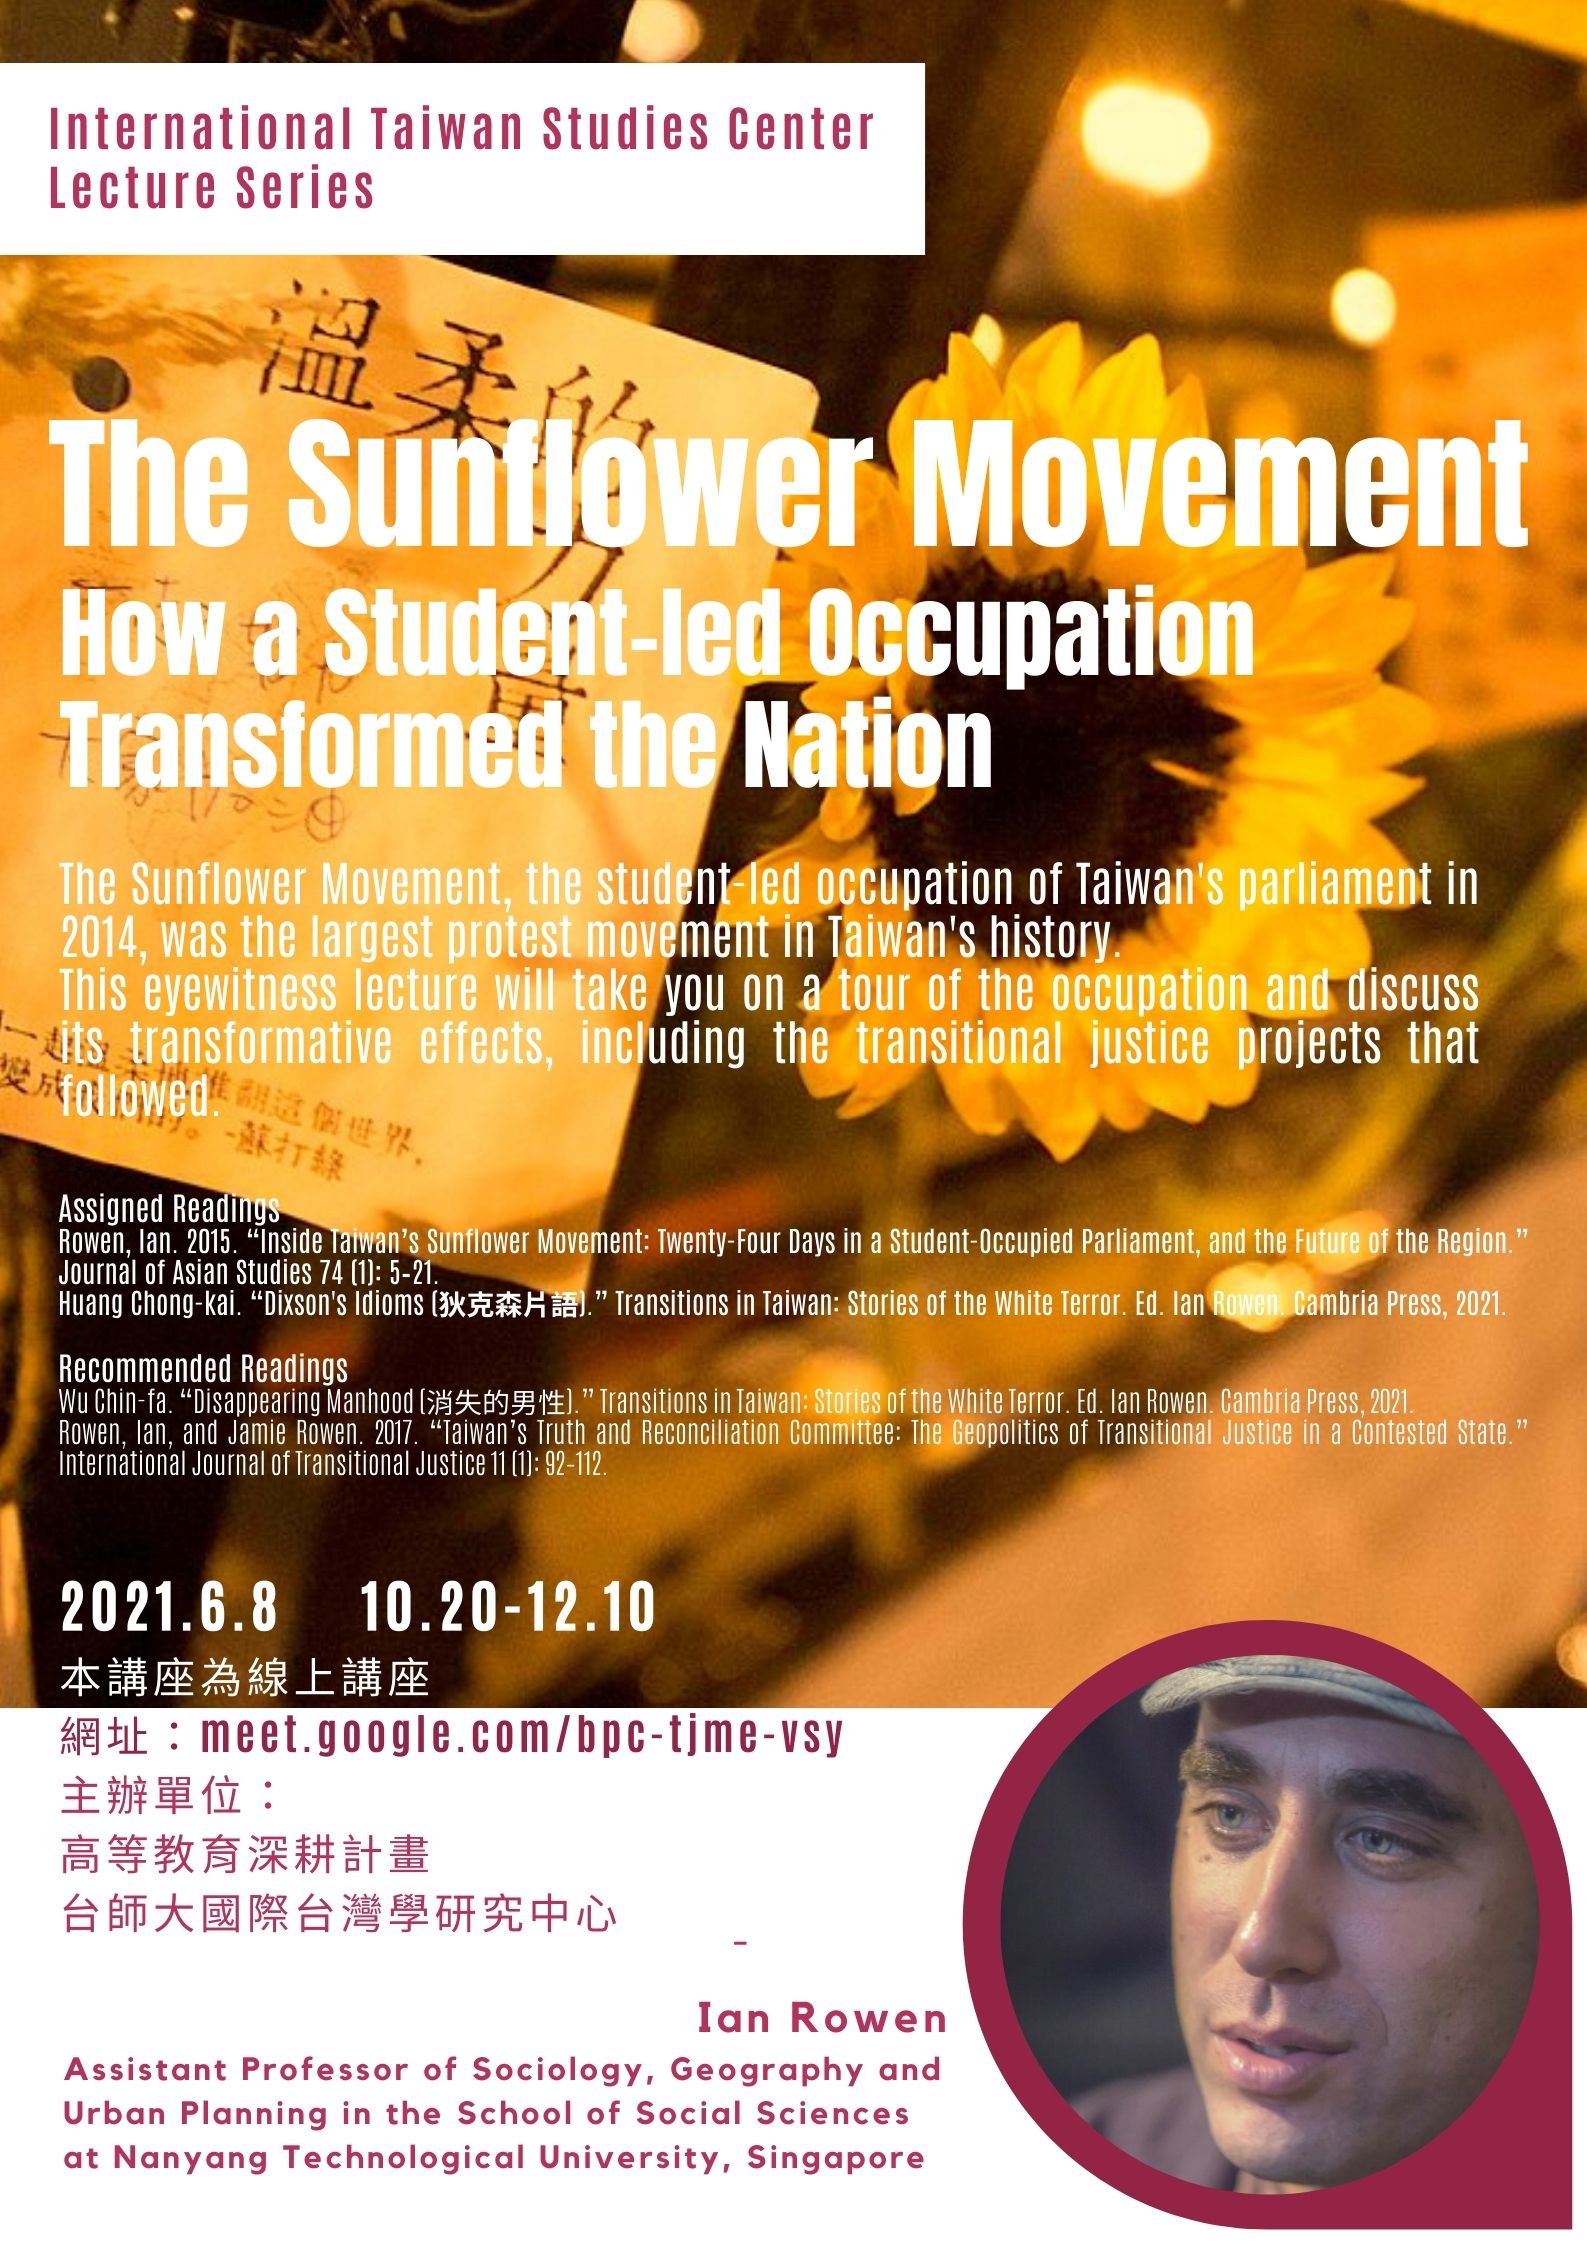 The Sunflower Movement: How a Student-led Occupation Transformed the Nation poster